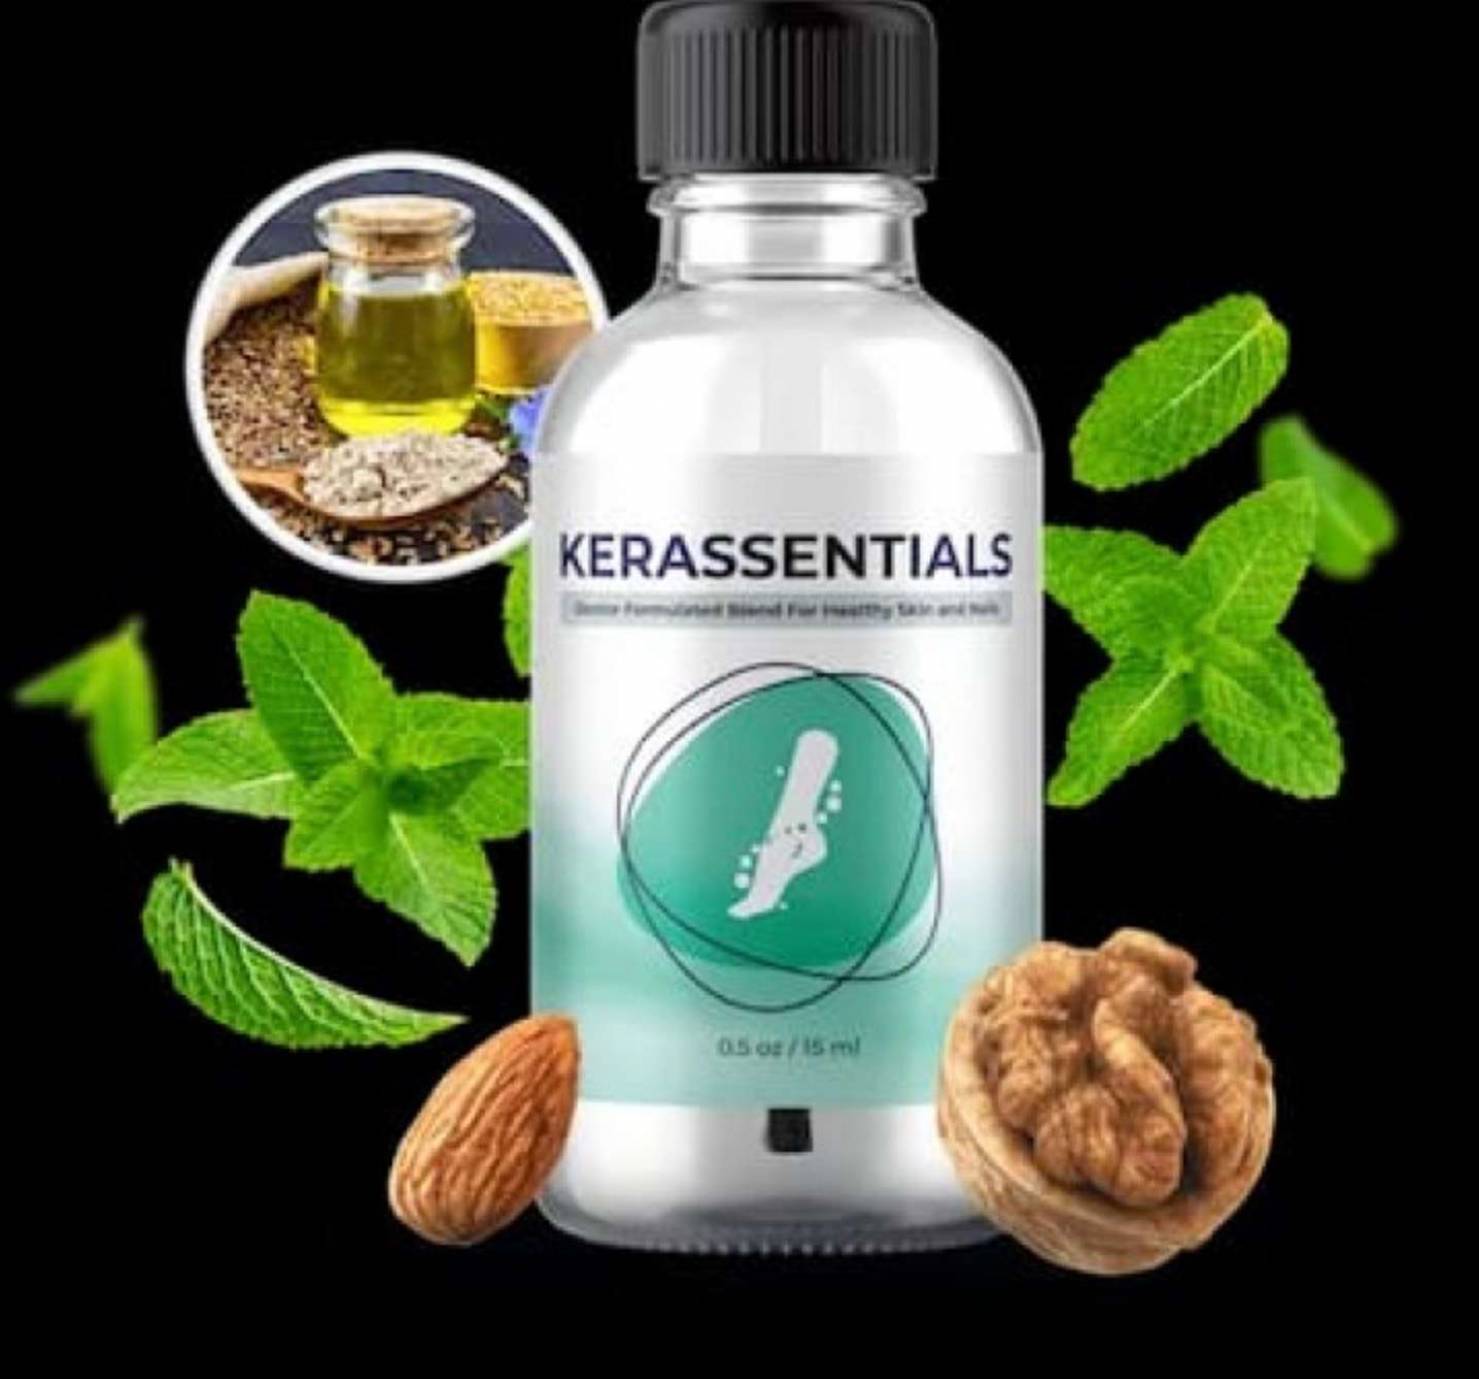 Reviews Of Kerassentials Youtube